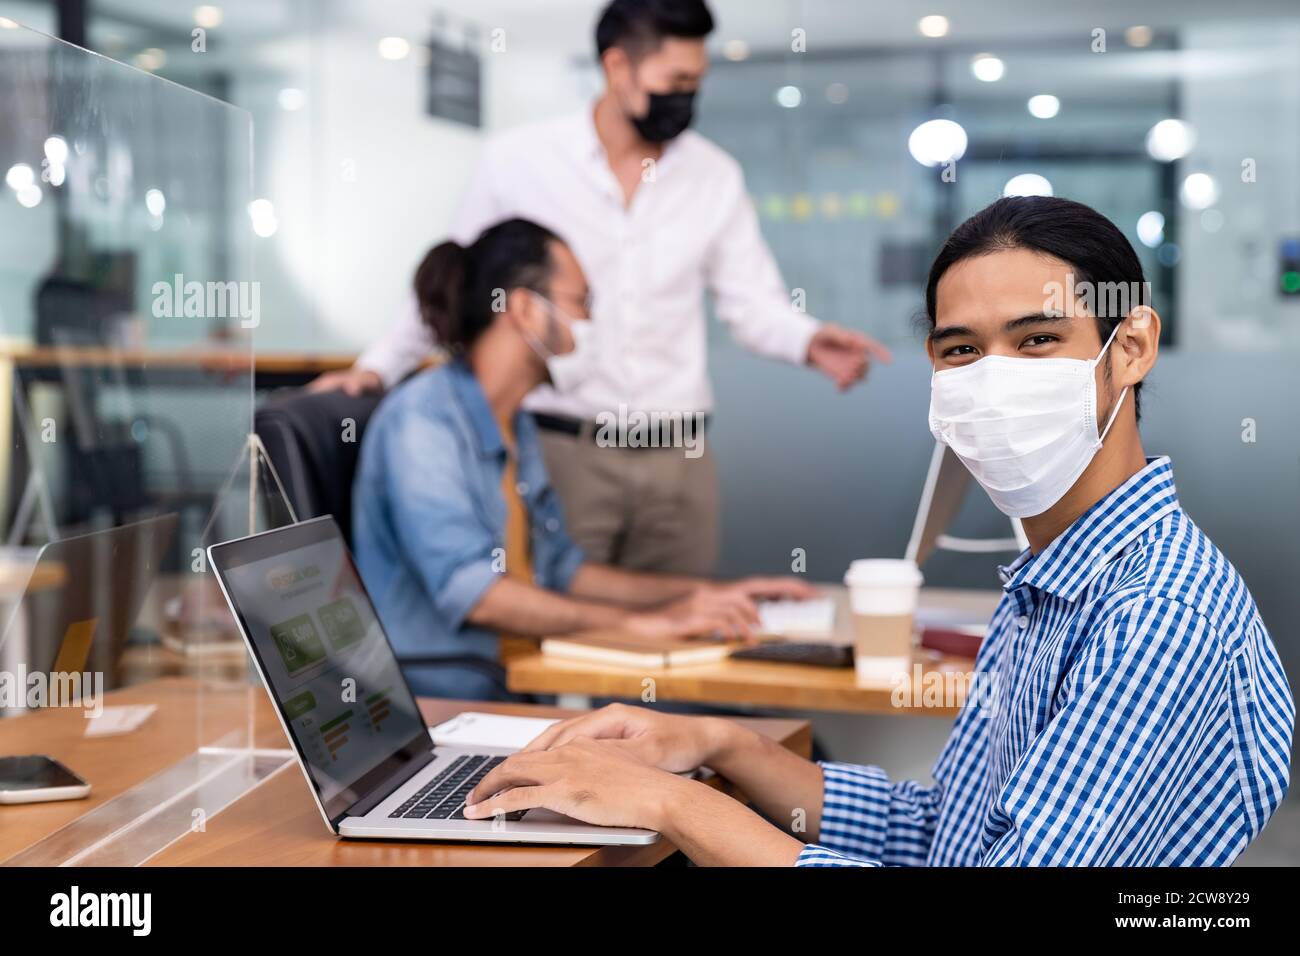 Asian Office employee with protective face mask working in new normal office with social distance practice to his colleague in background prevent coro Stock Photo